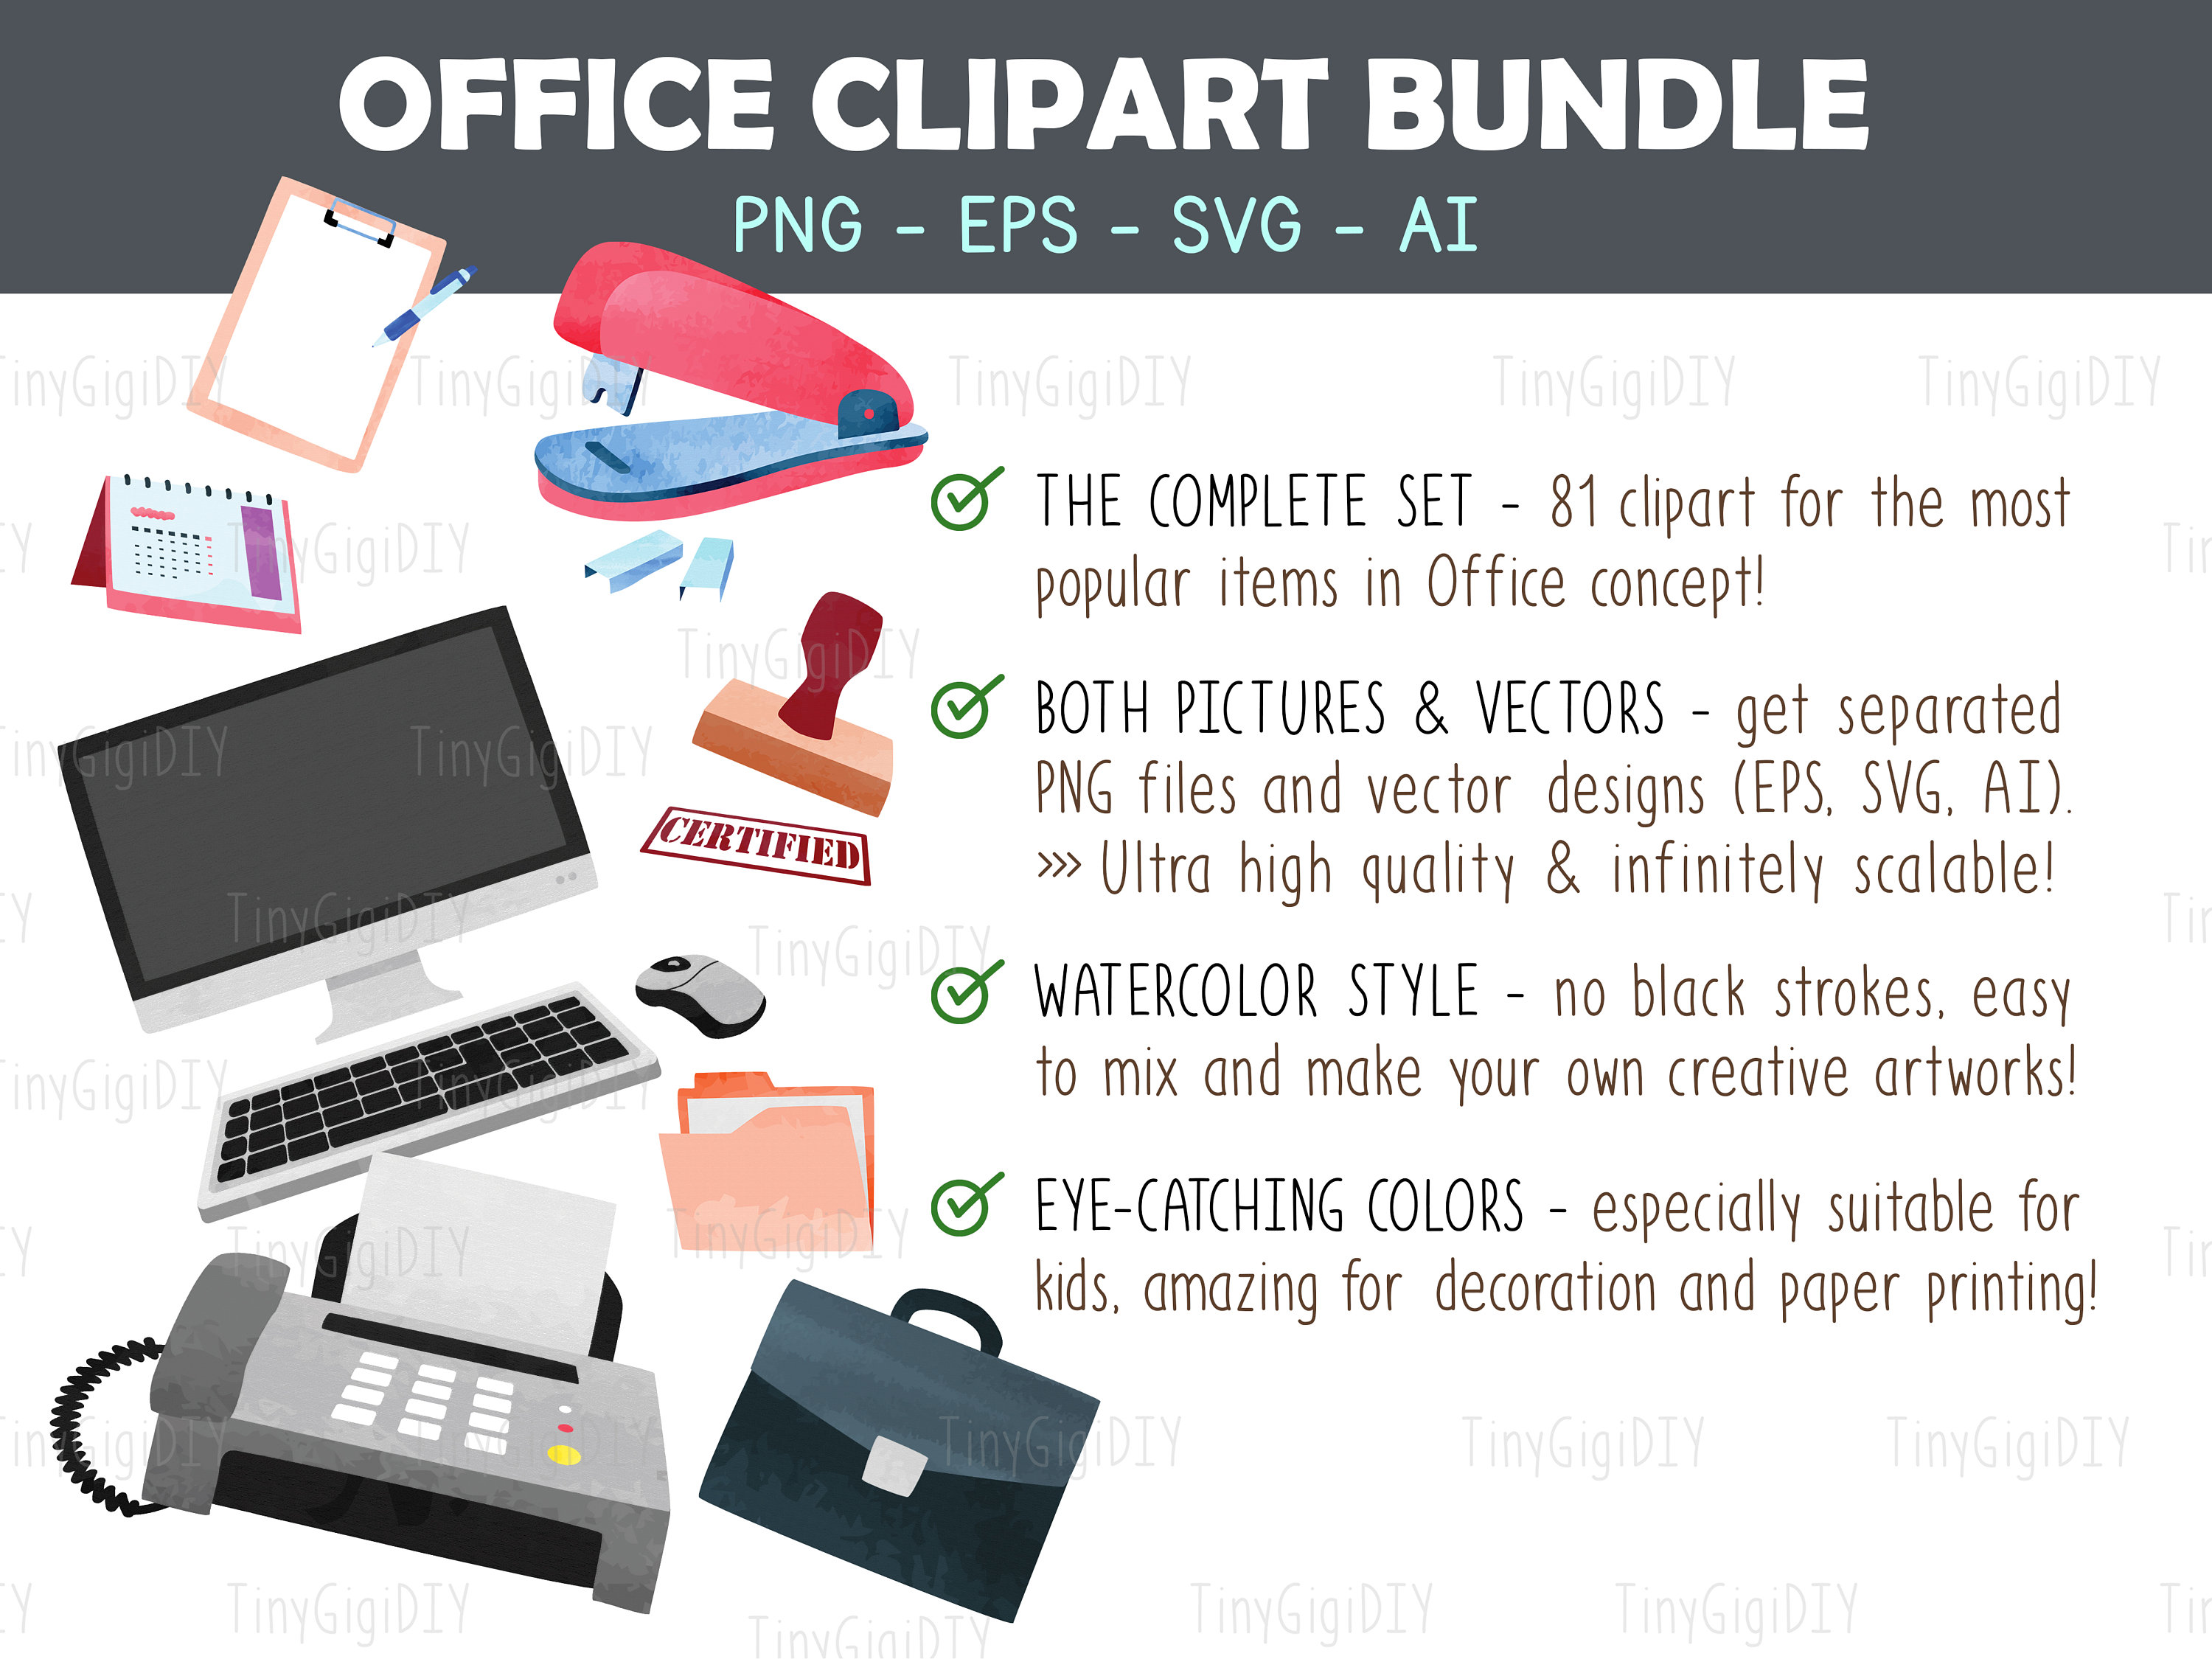 Work Desk with Office Accessories Clip Art Style SVG Cut file by Creative  Fabrica Crafts · Creative Fabrica